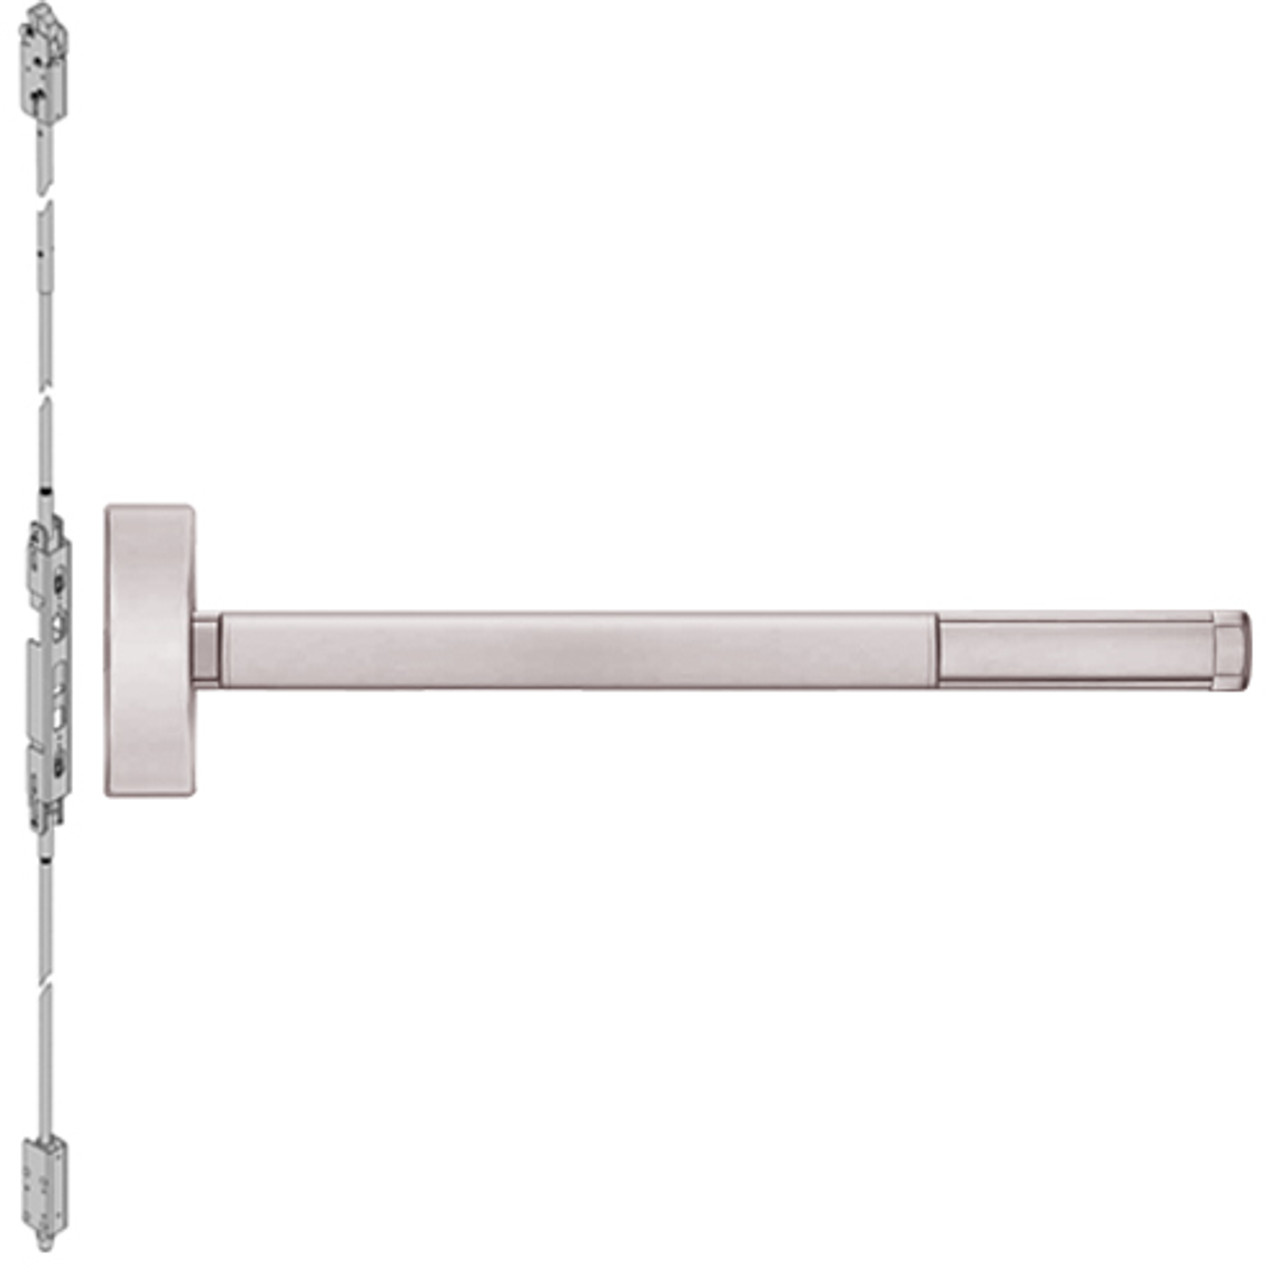 TSFL2801LBR-628-36 PHI 2800 Series Fire Rated Concealed Vertical Rod Exit Device with Touchbar Monitoring Switch Prepped for Cover Plate in Satin Aluminum Finish